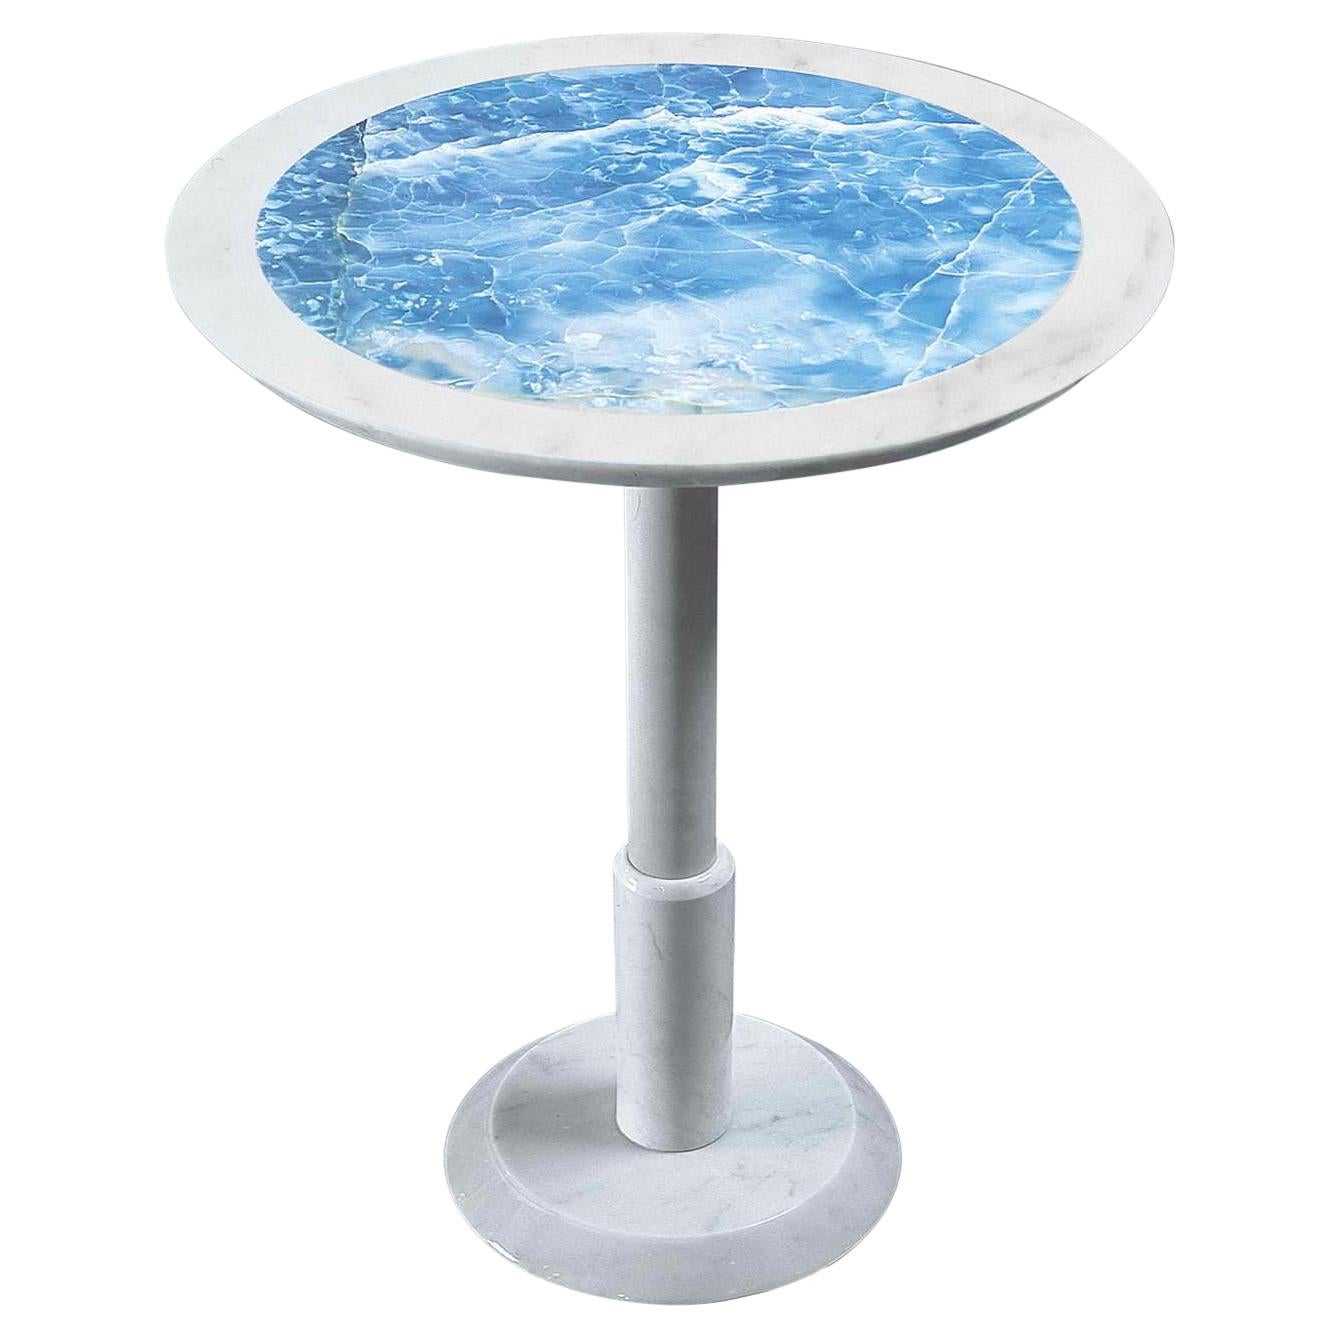 21st Century by Arch. M.Piva "BISTROT" Round Marble Table in White P. & Blu Onix For Sale